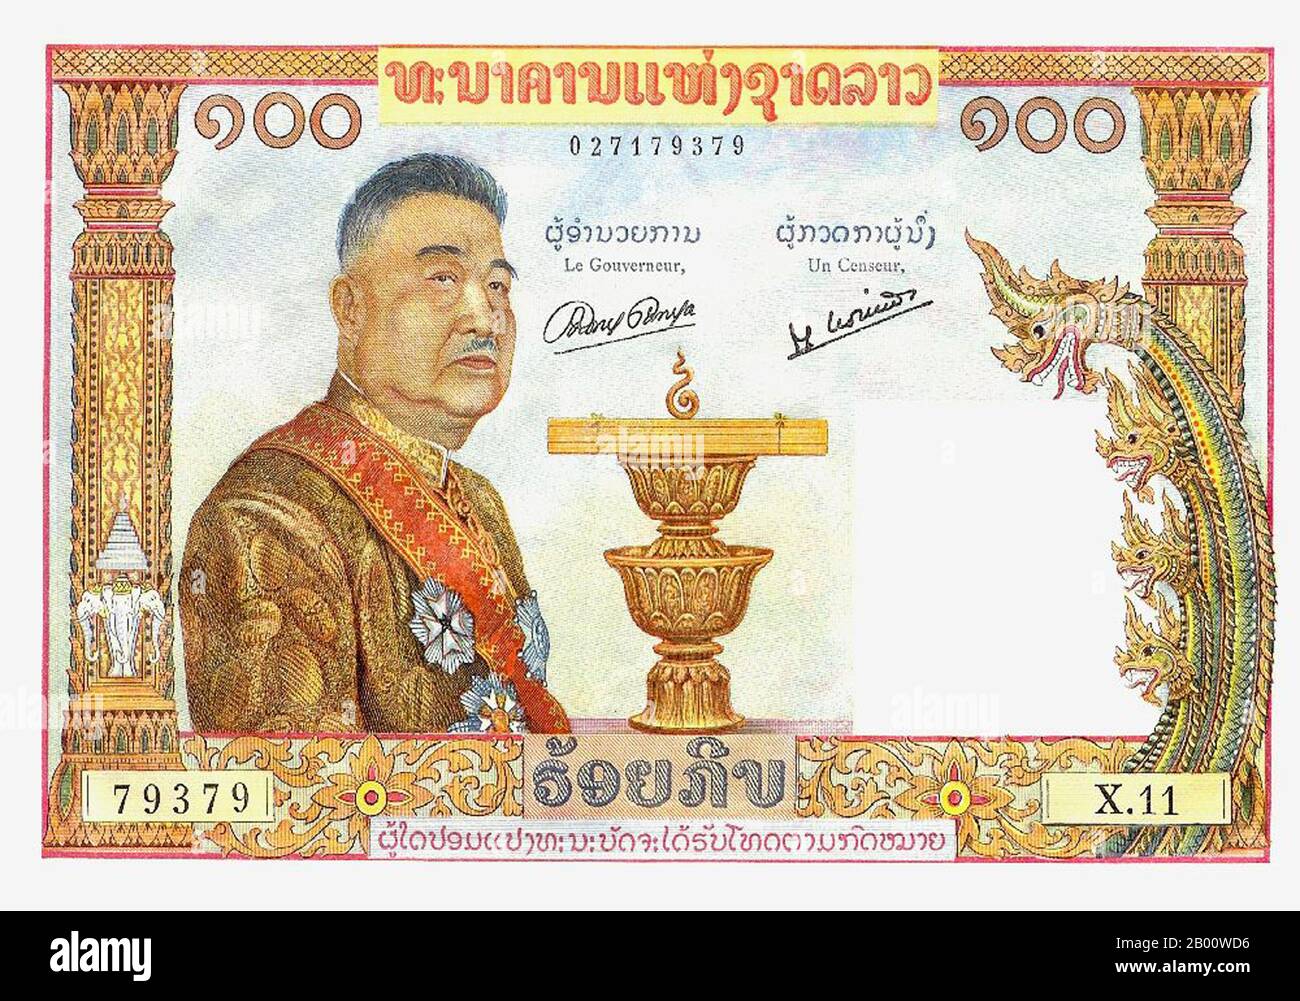 Laos: King Sisavang Vong (or Sisavangvong) (1885-1959) on a 100 kip bank note from 1957.  Sisavang Phoulivong (or Sisavangvong) (14 July 1885 - 29 October 1959), was King of Luang Phrabang and later the Kingdom of Laos from 28 April 1904 until his death on 20 October 1959.  His father was King Zakarine and his mother was Queen Thongsy. He was educated at Lycée Chasseloup-Laubat, Saigon, and at l'École Coloniale in Paris. He was known as a 'playboy' king with up to 50 children by as many as 15 wives. Stock Photo